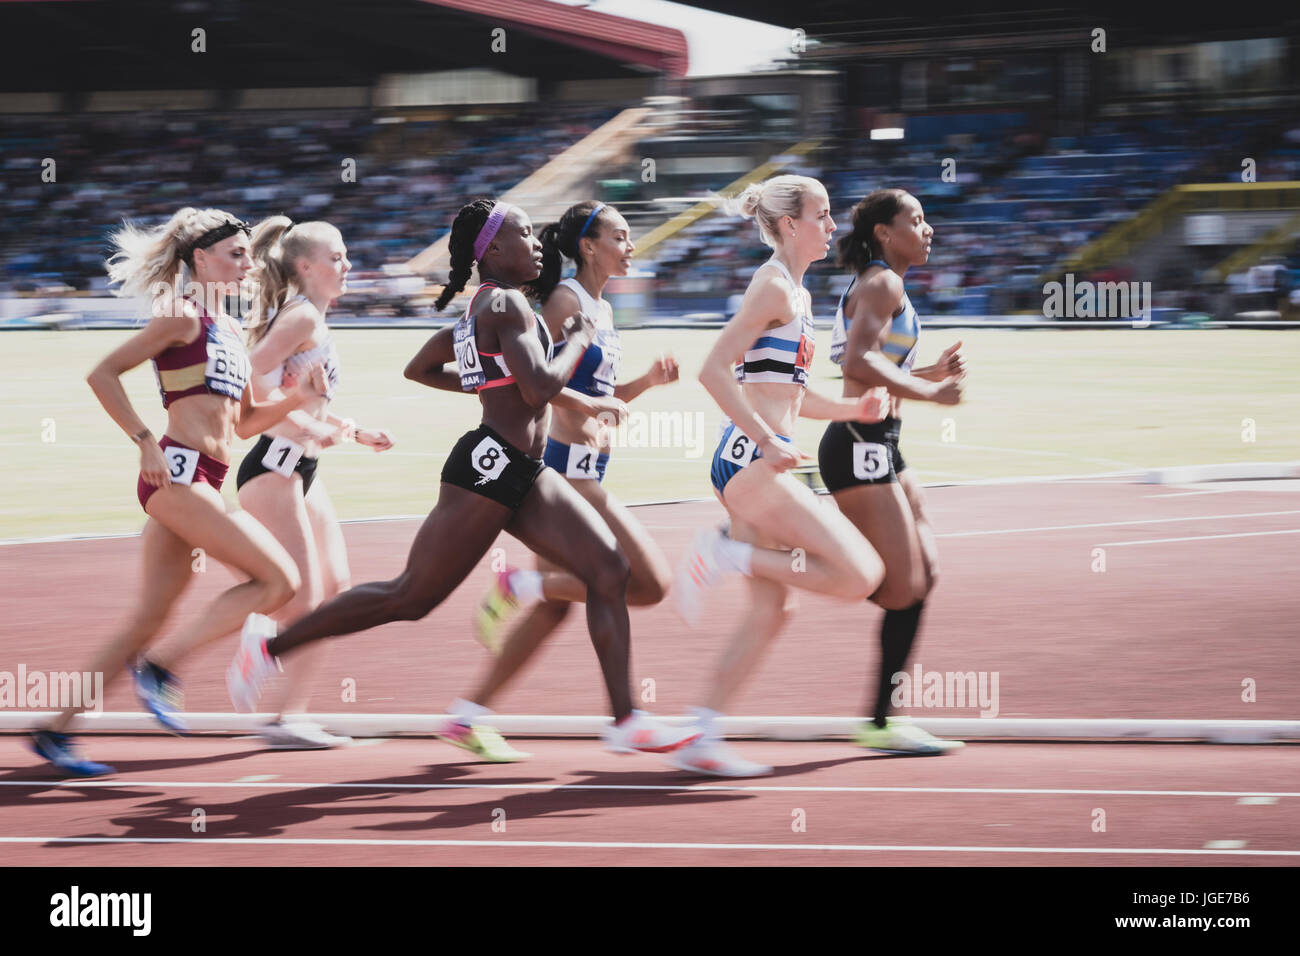 The women's 800m final at the British Athletics Championships and World Trials at Birmingham, United Kingdom on 1-2 July 2017 Stock Photo